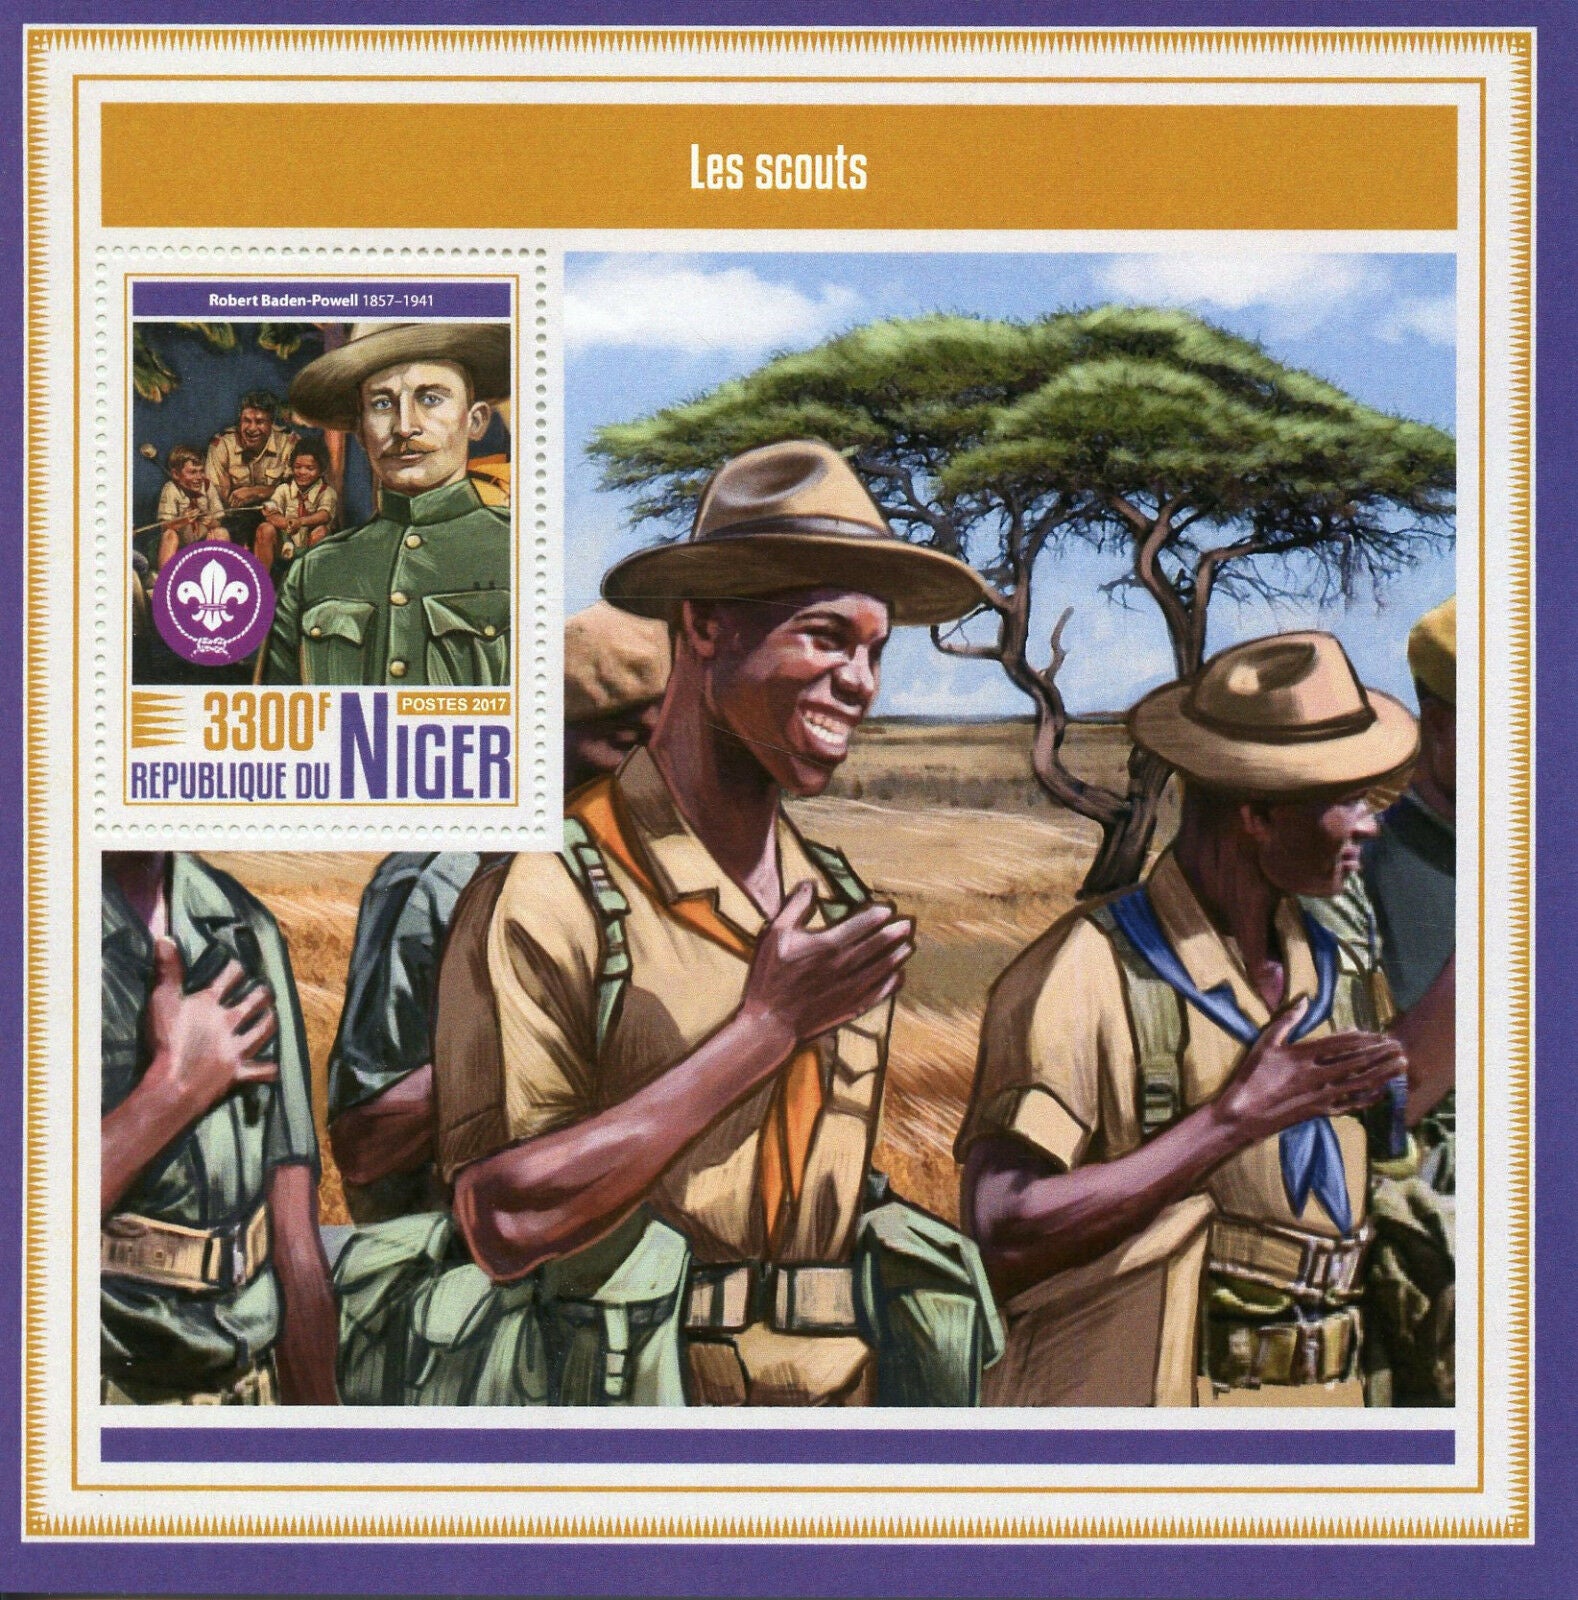 Niger 2017 MNH Boy Girl Scouts Scouting Robert Baden-Powell 1 S/S Stamps